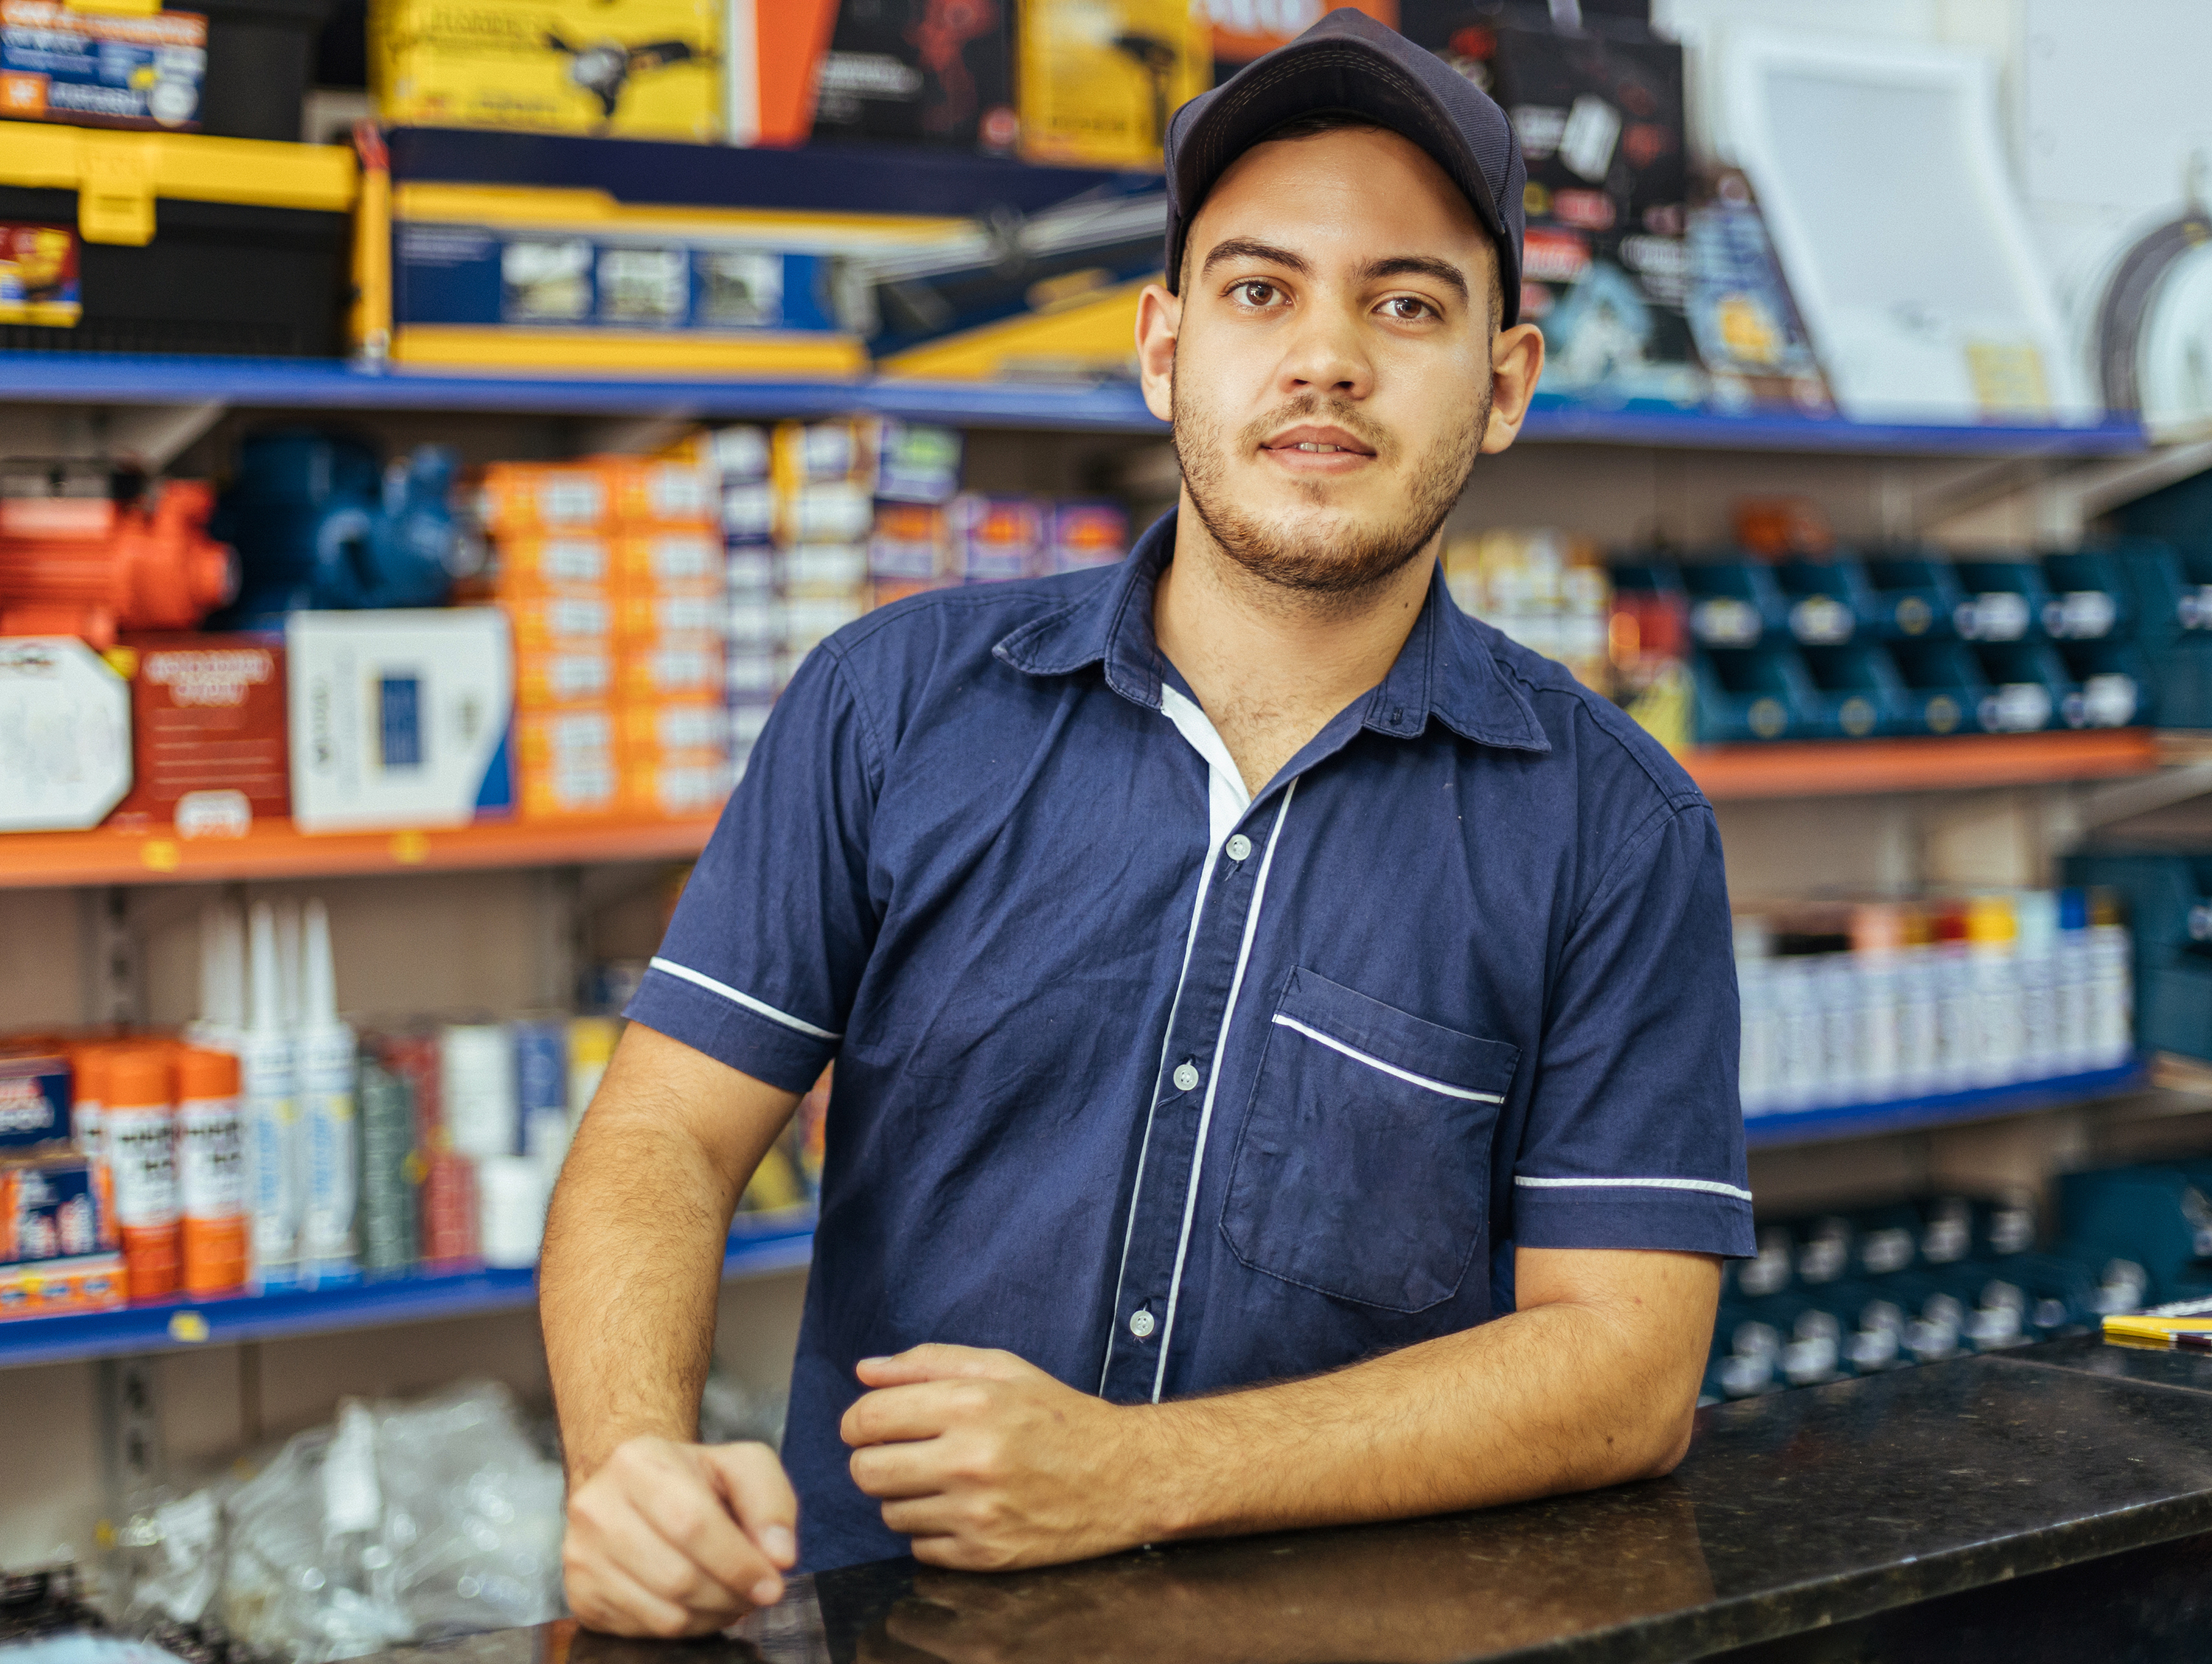 Male worker at auto parts store counter